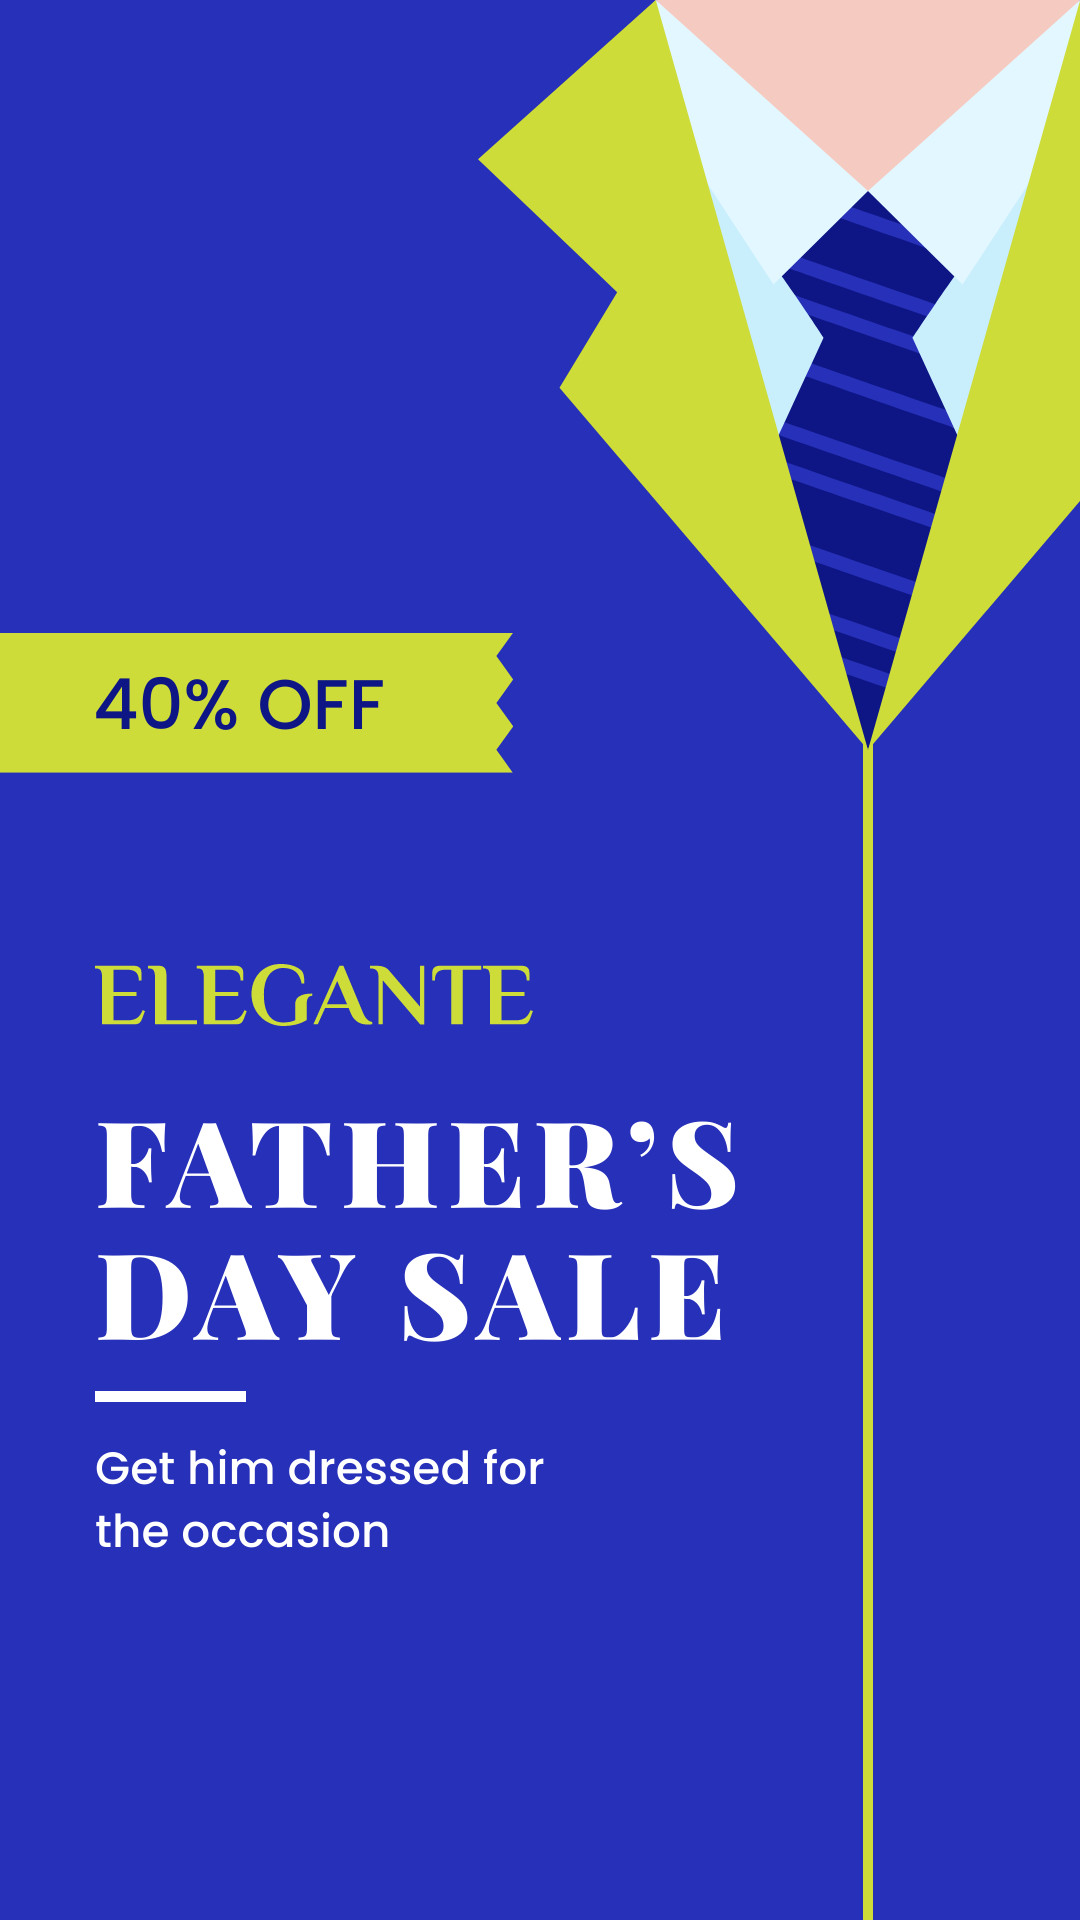 Elegant Father's Day Blue Sale Facebook Cover 820x360